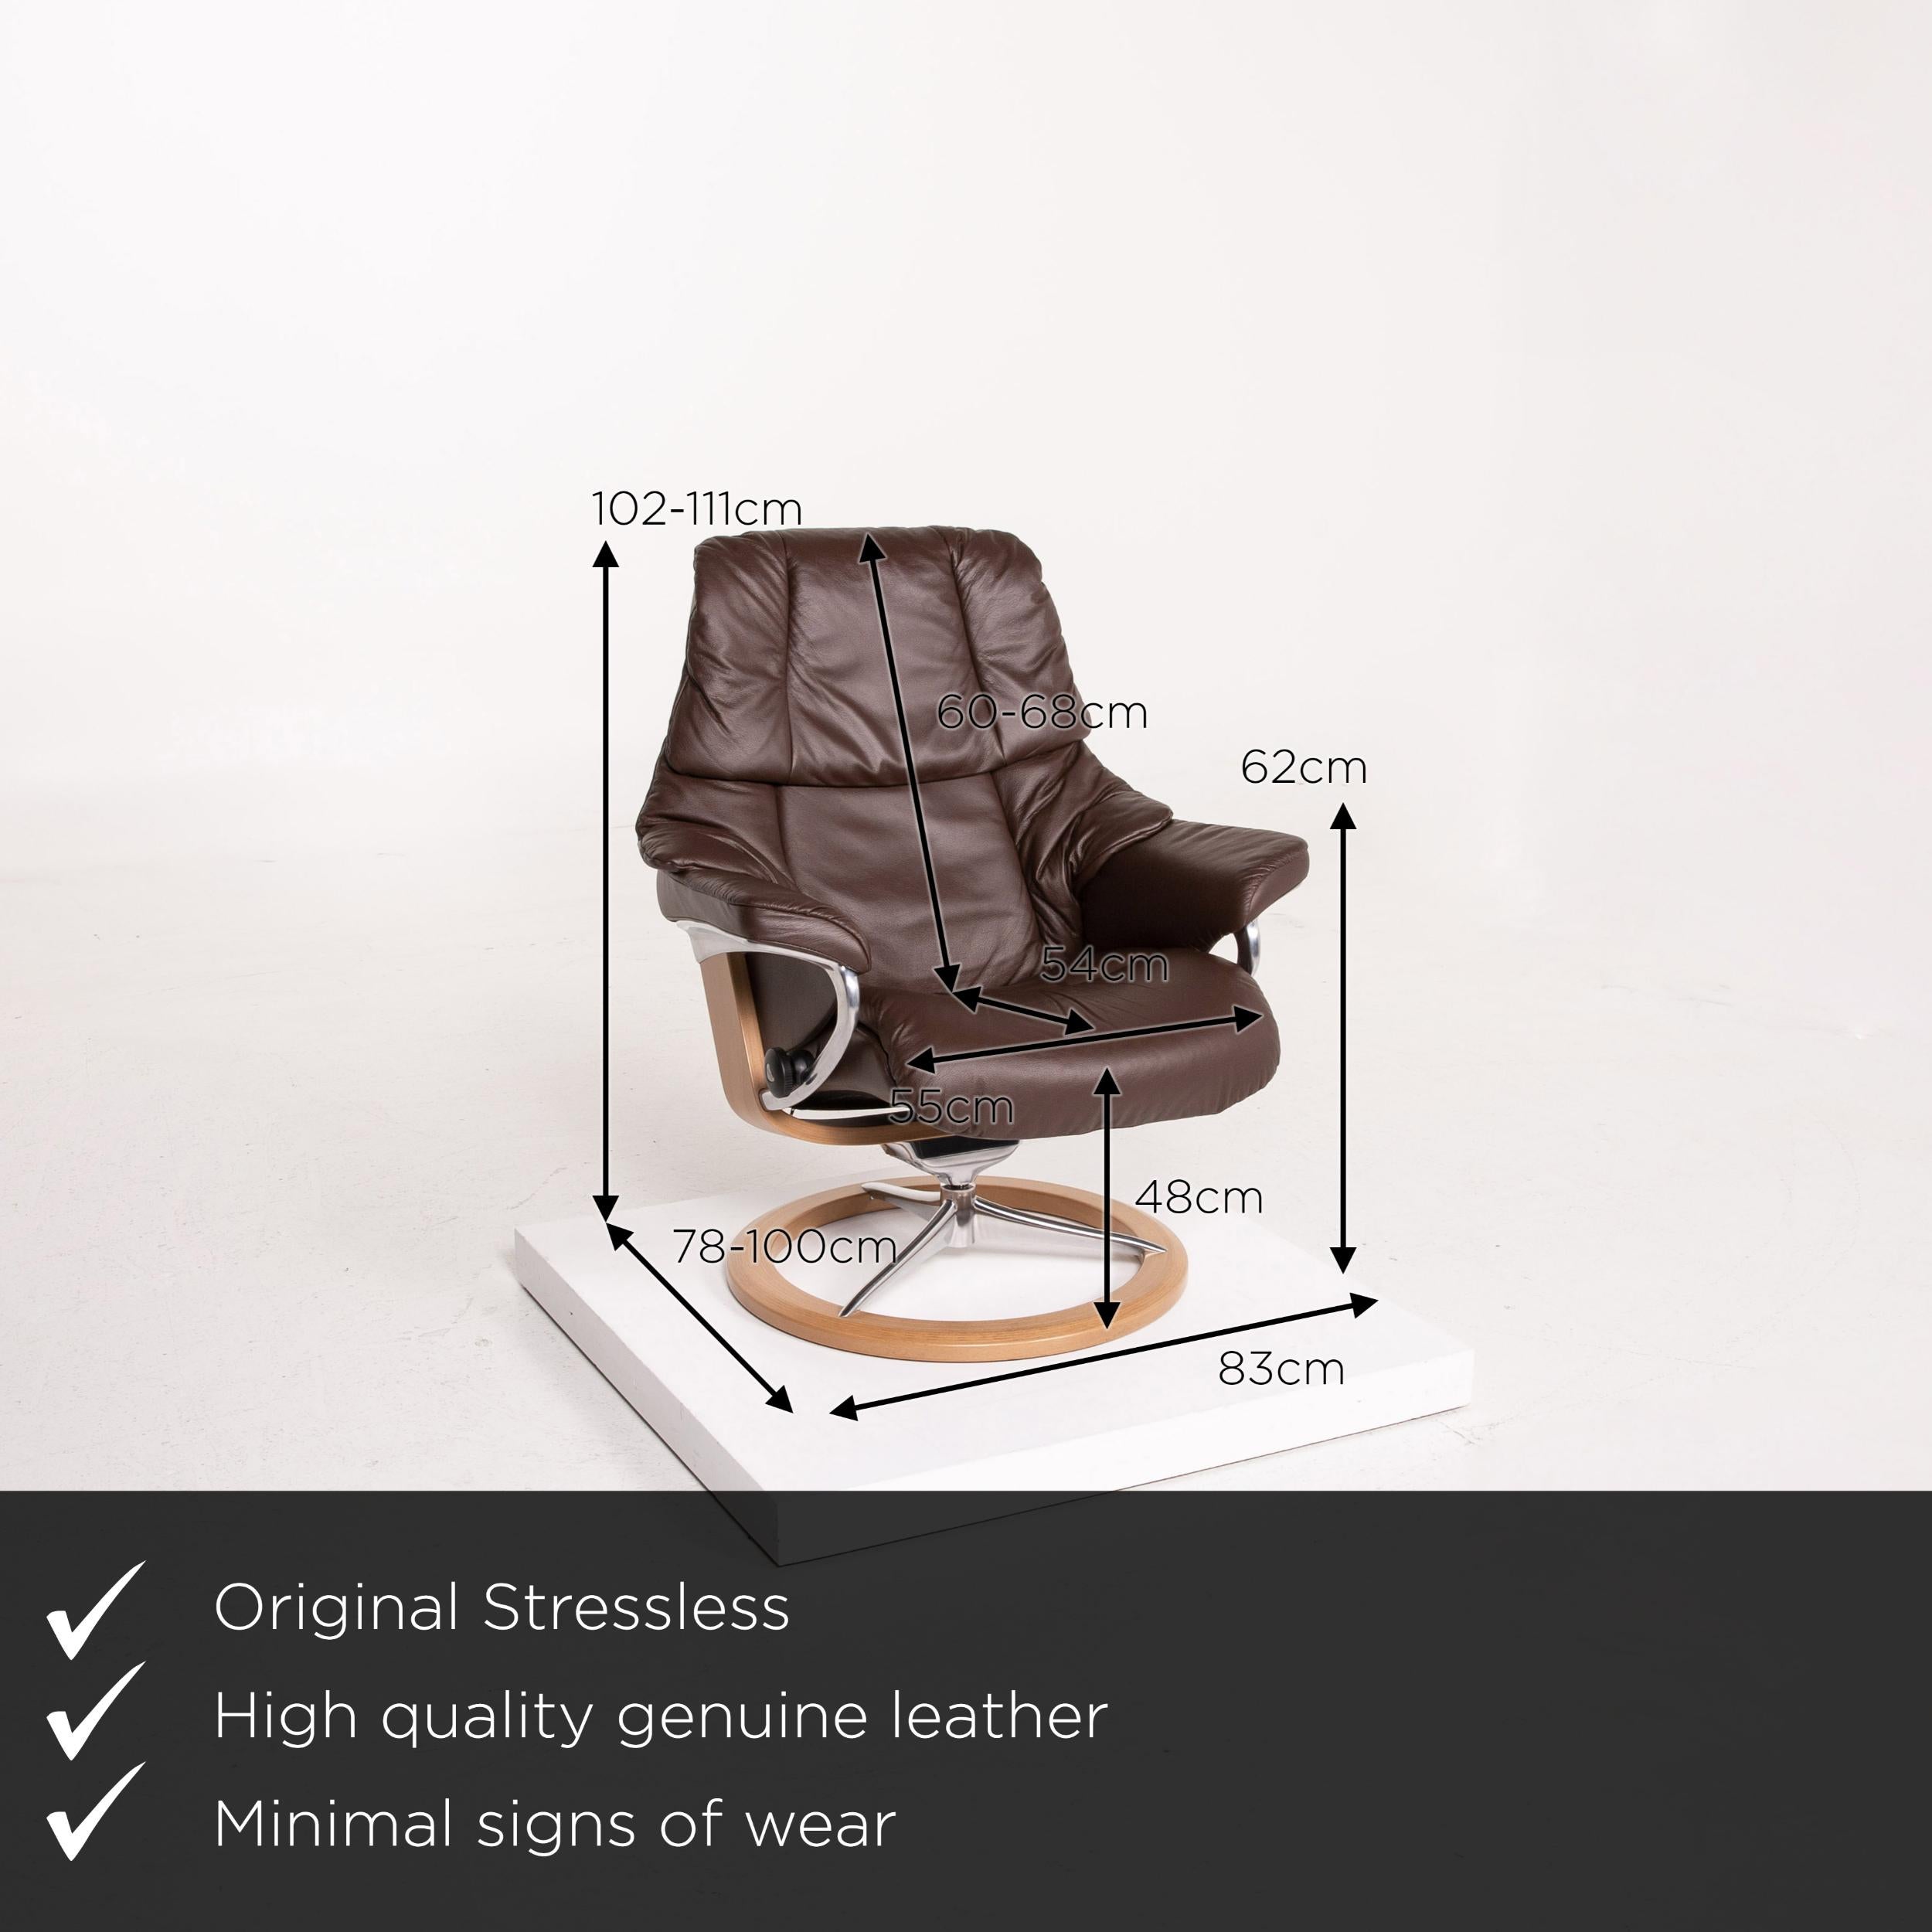 We present to you a Stressless Reno leather armchair incl. Stool dark brown relaxation.


 Product measurements in centimeters:
 

Depth 78
Width 83
Height 102
Seat height 48
Rest height 62
Seat depth 54
Seat width 55
Back height 60.
 